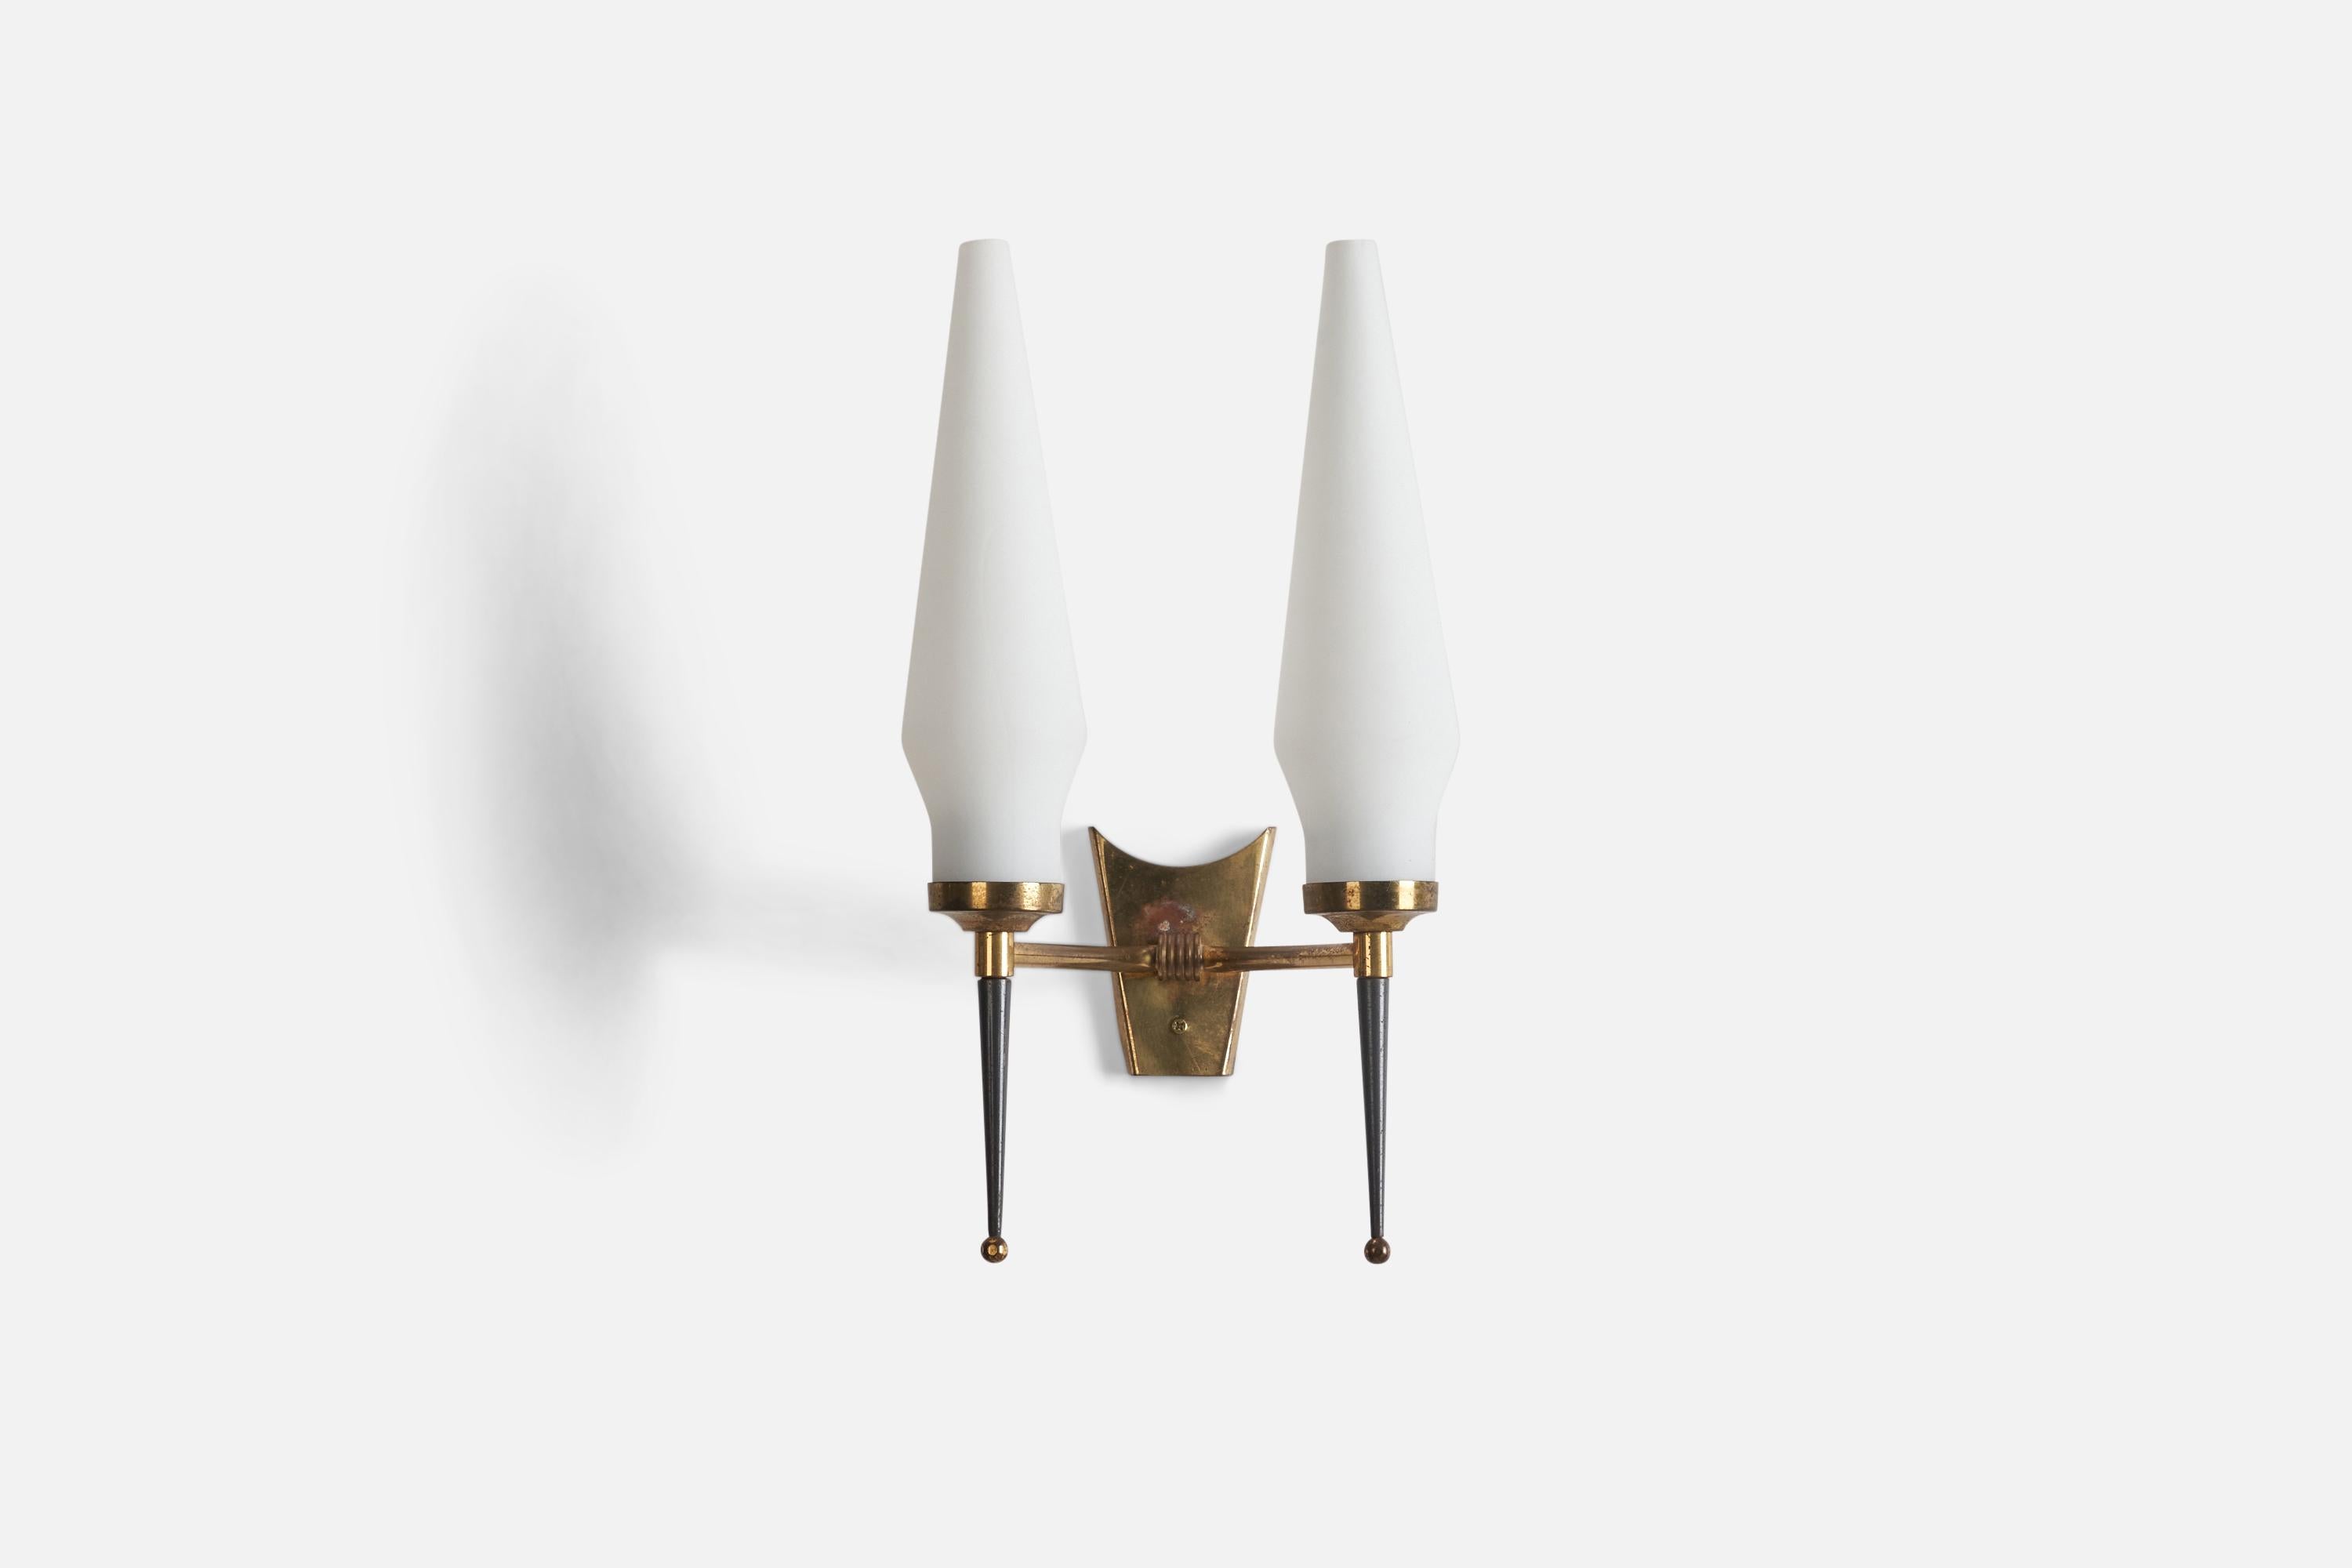 A pair of brass, metal, milk glass wall lights designed and produced by an Italian Designer, Italy, 1950s.

Dimensions of back plate (inches) : 4 x 2.9 x 0.5 (Height x Width x Depth)

Sockets take E-14 bulbs.

There is no maximum wattage